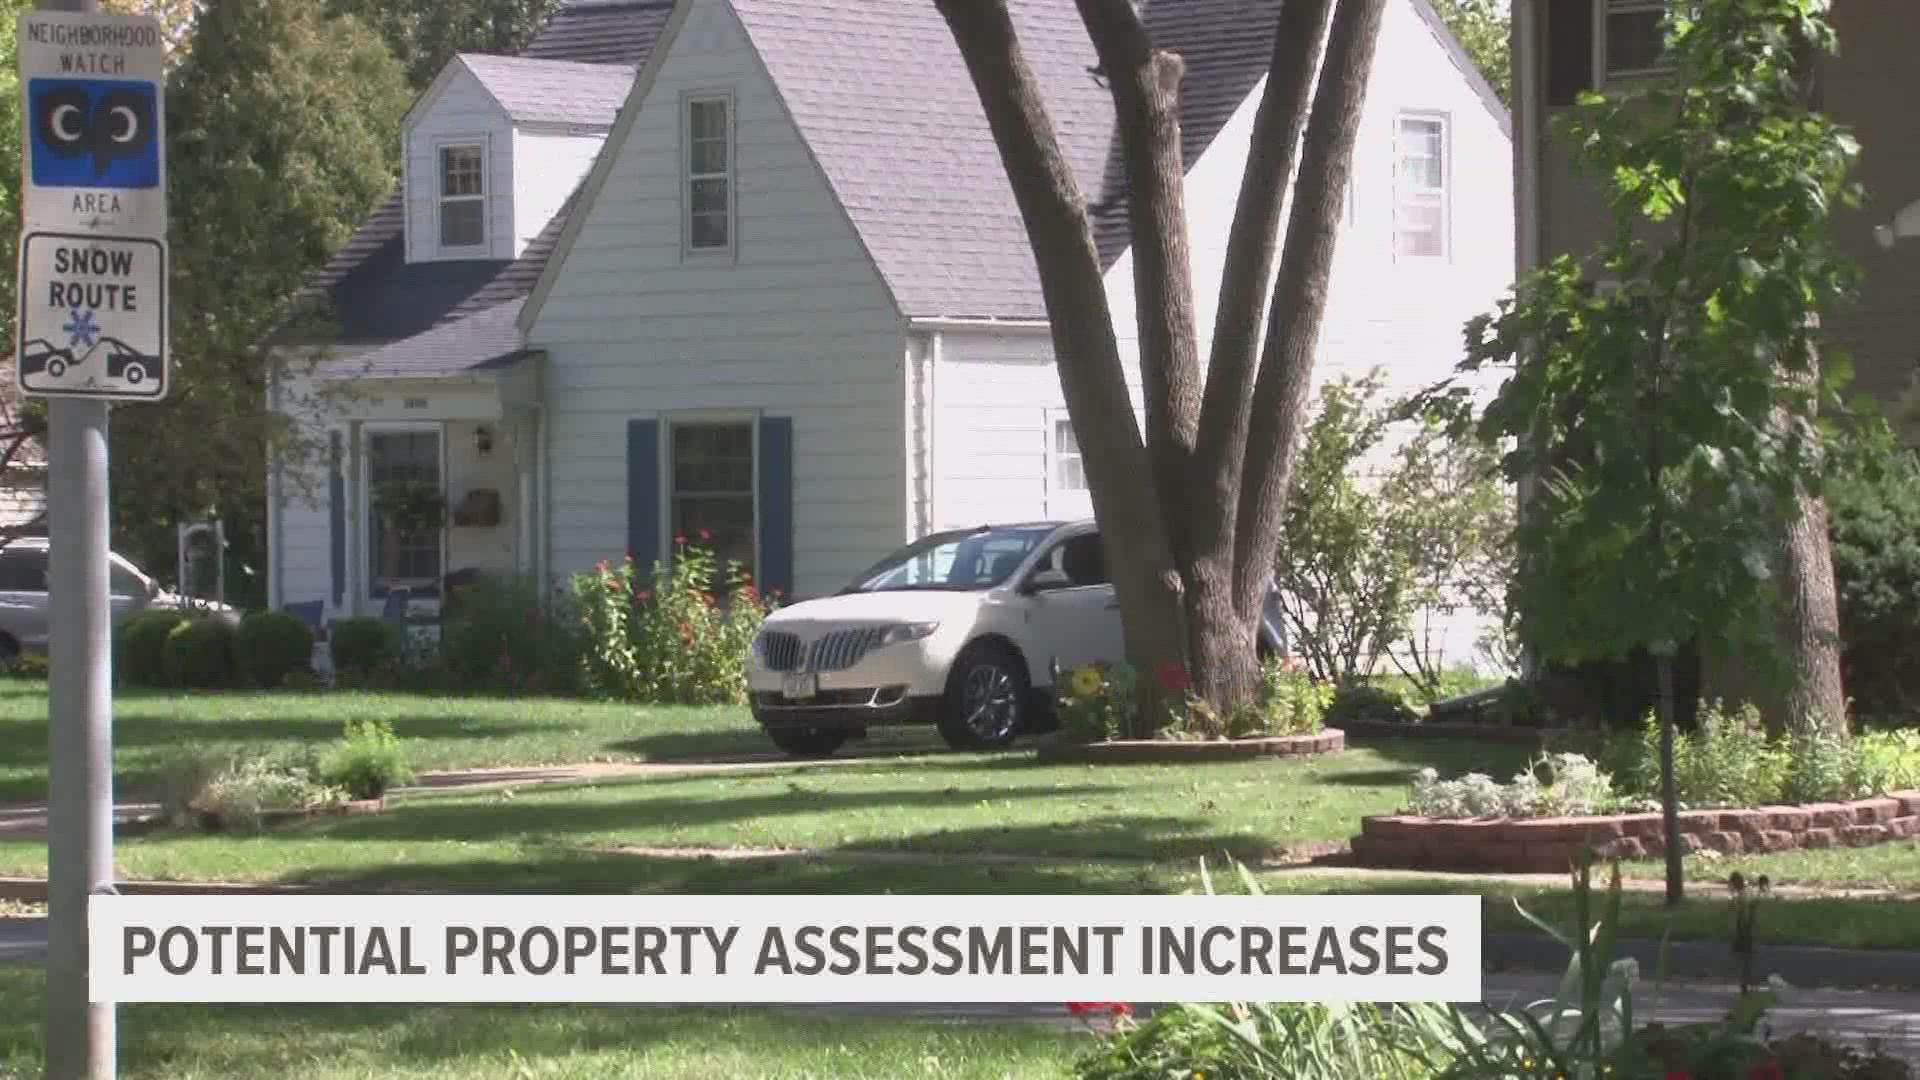 Property assessments are expected to increase in counties across central Iowa, based on home sales for the last two years.